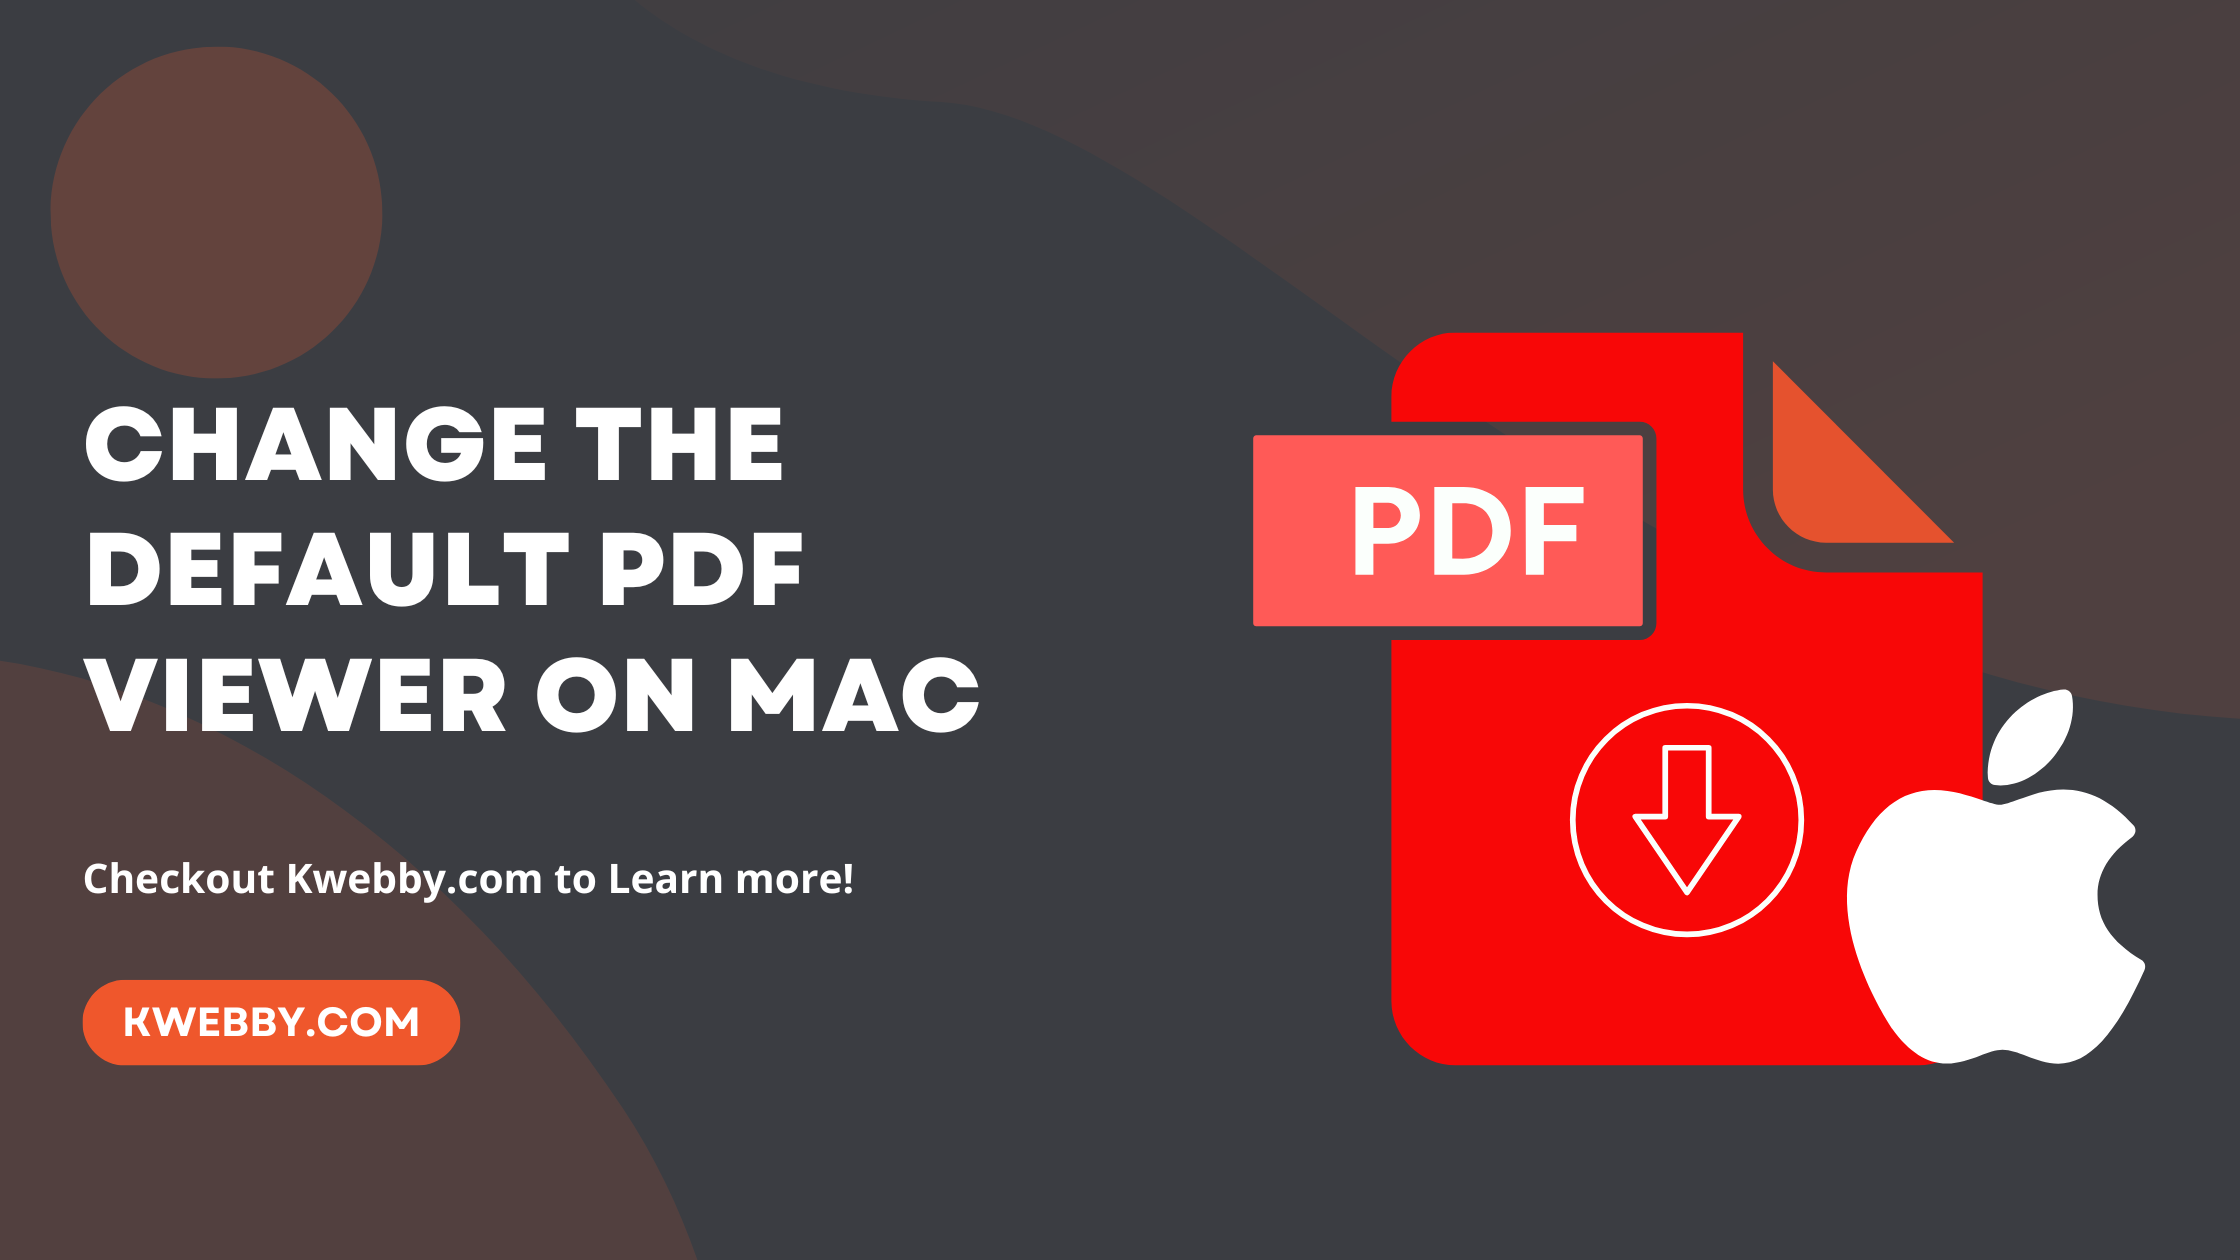 How to change the default PDF viewer on MAC in 2 Steps